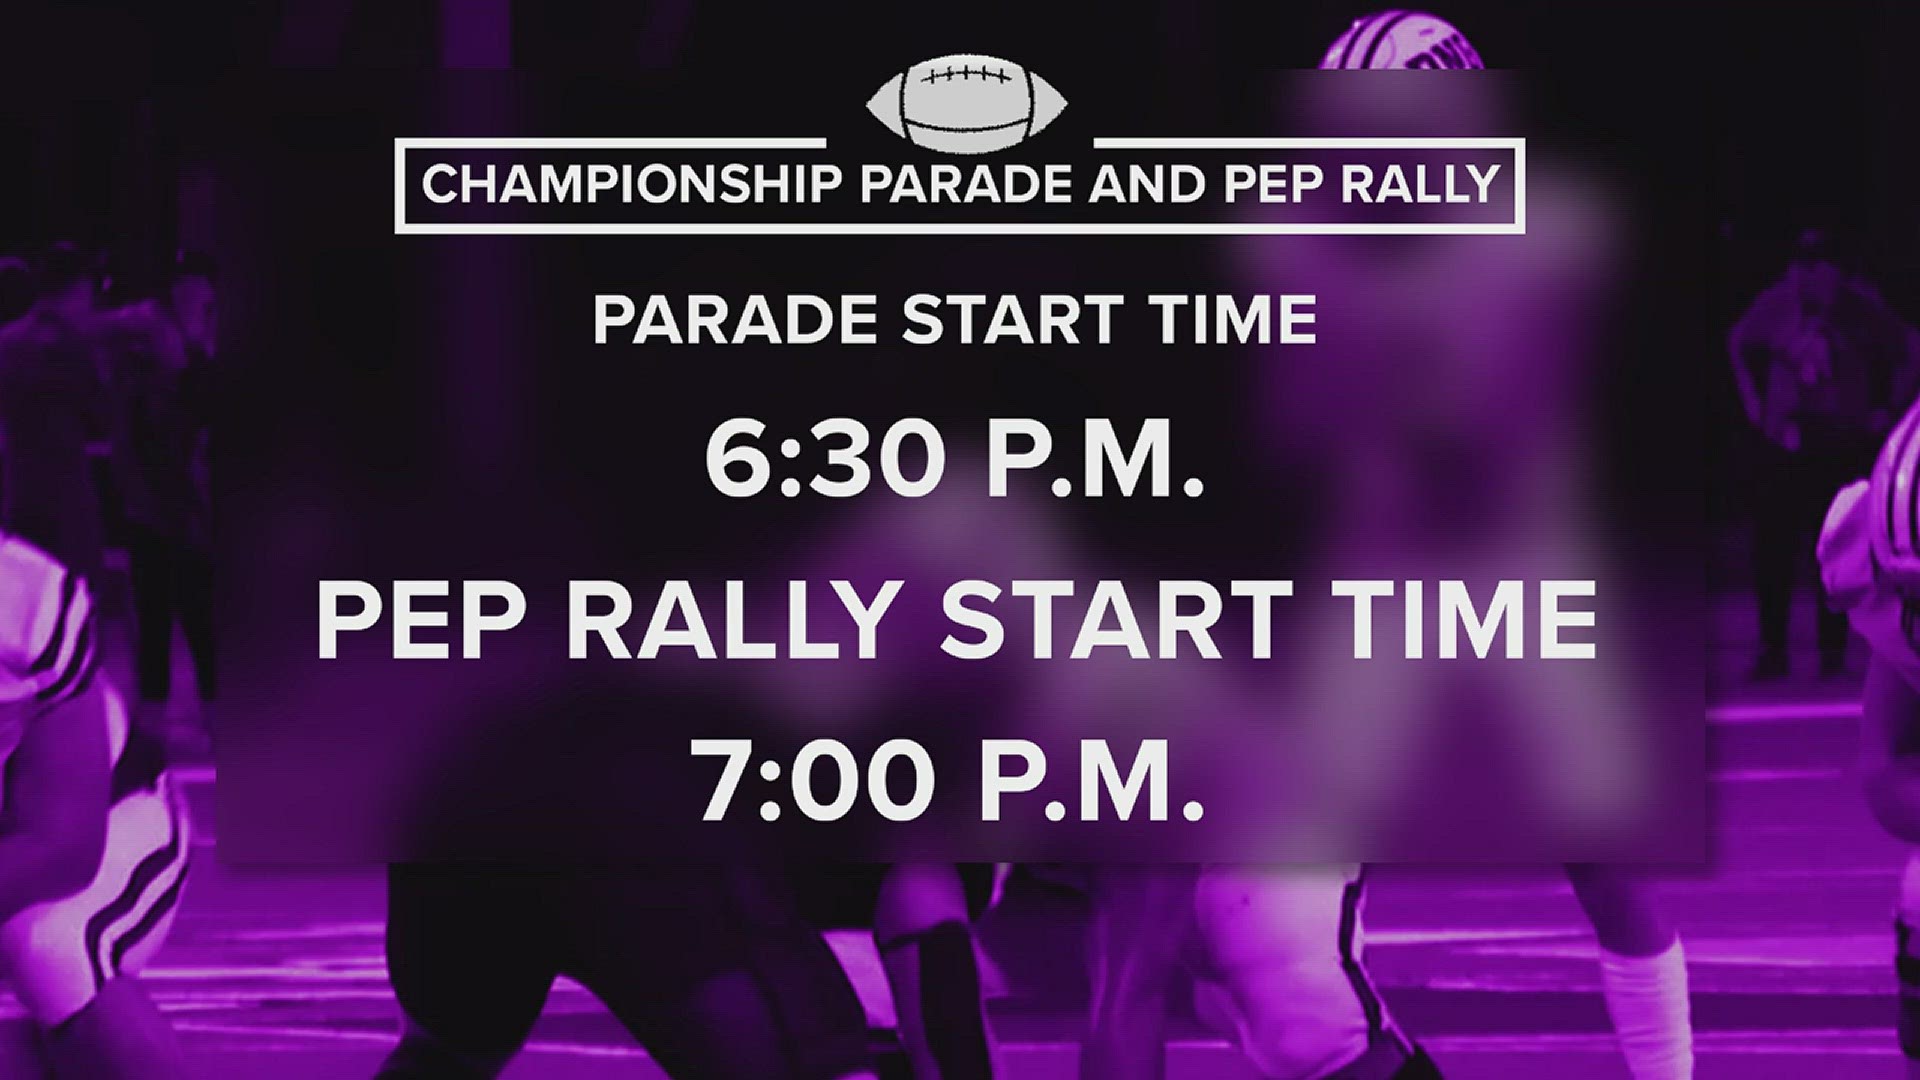 The parade will start at 6:30 p.m. at the public library on Merriman and will end in stadium a pep rally will follow at 7 p.m.